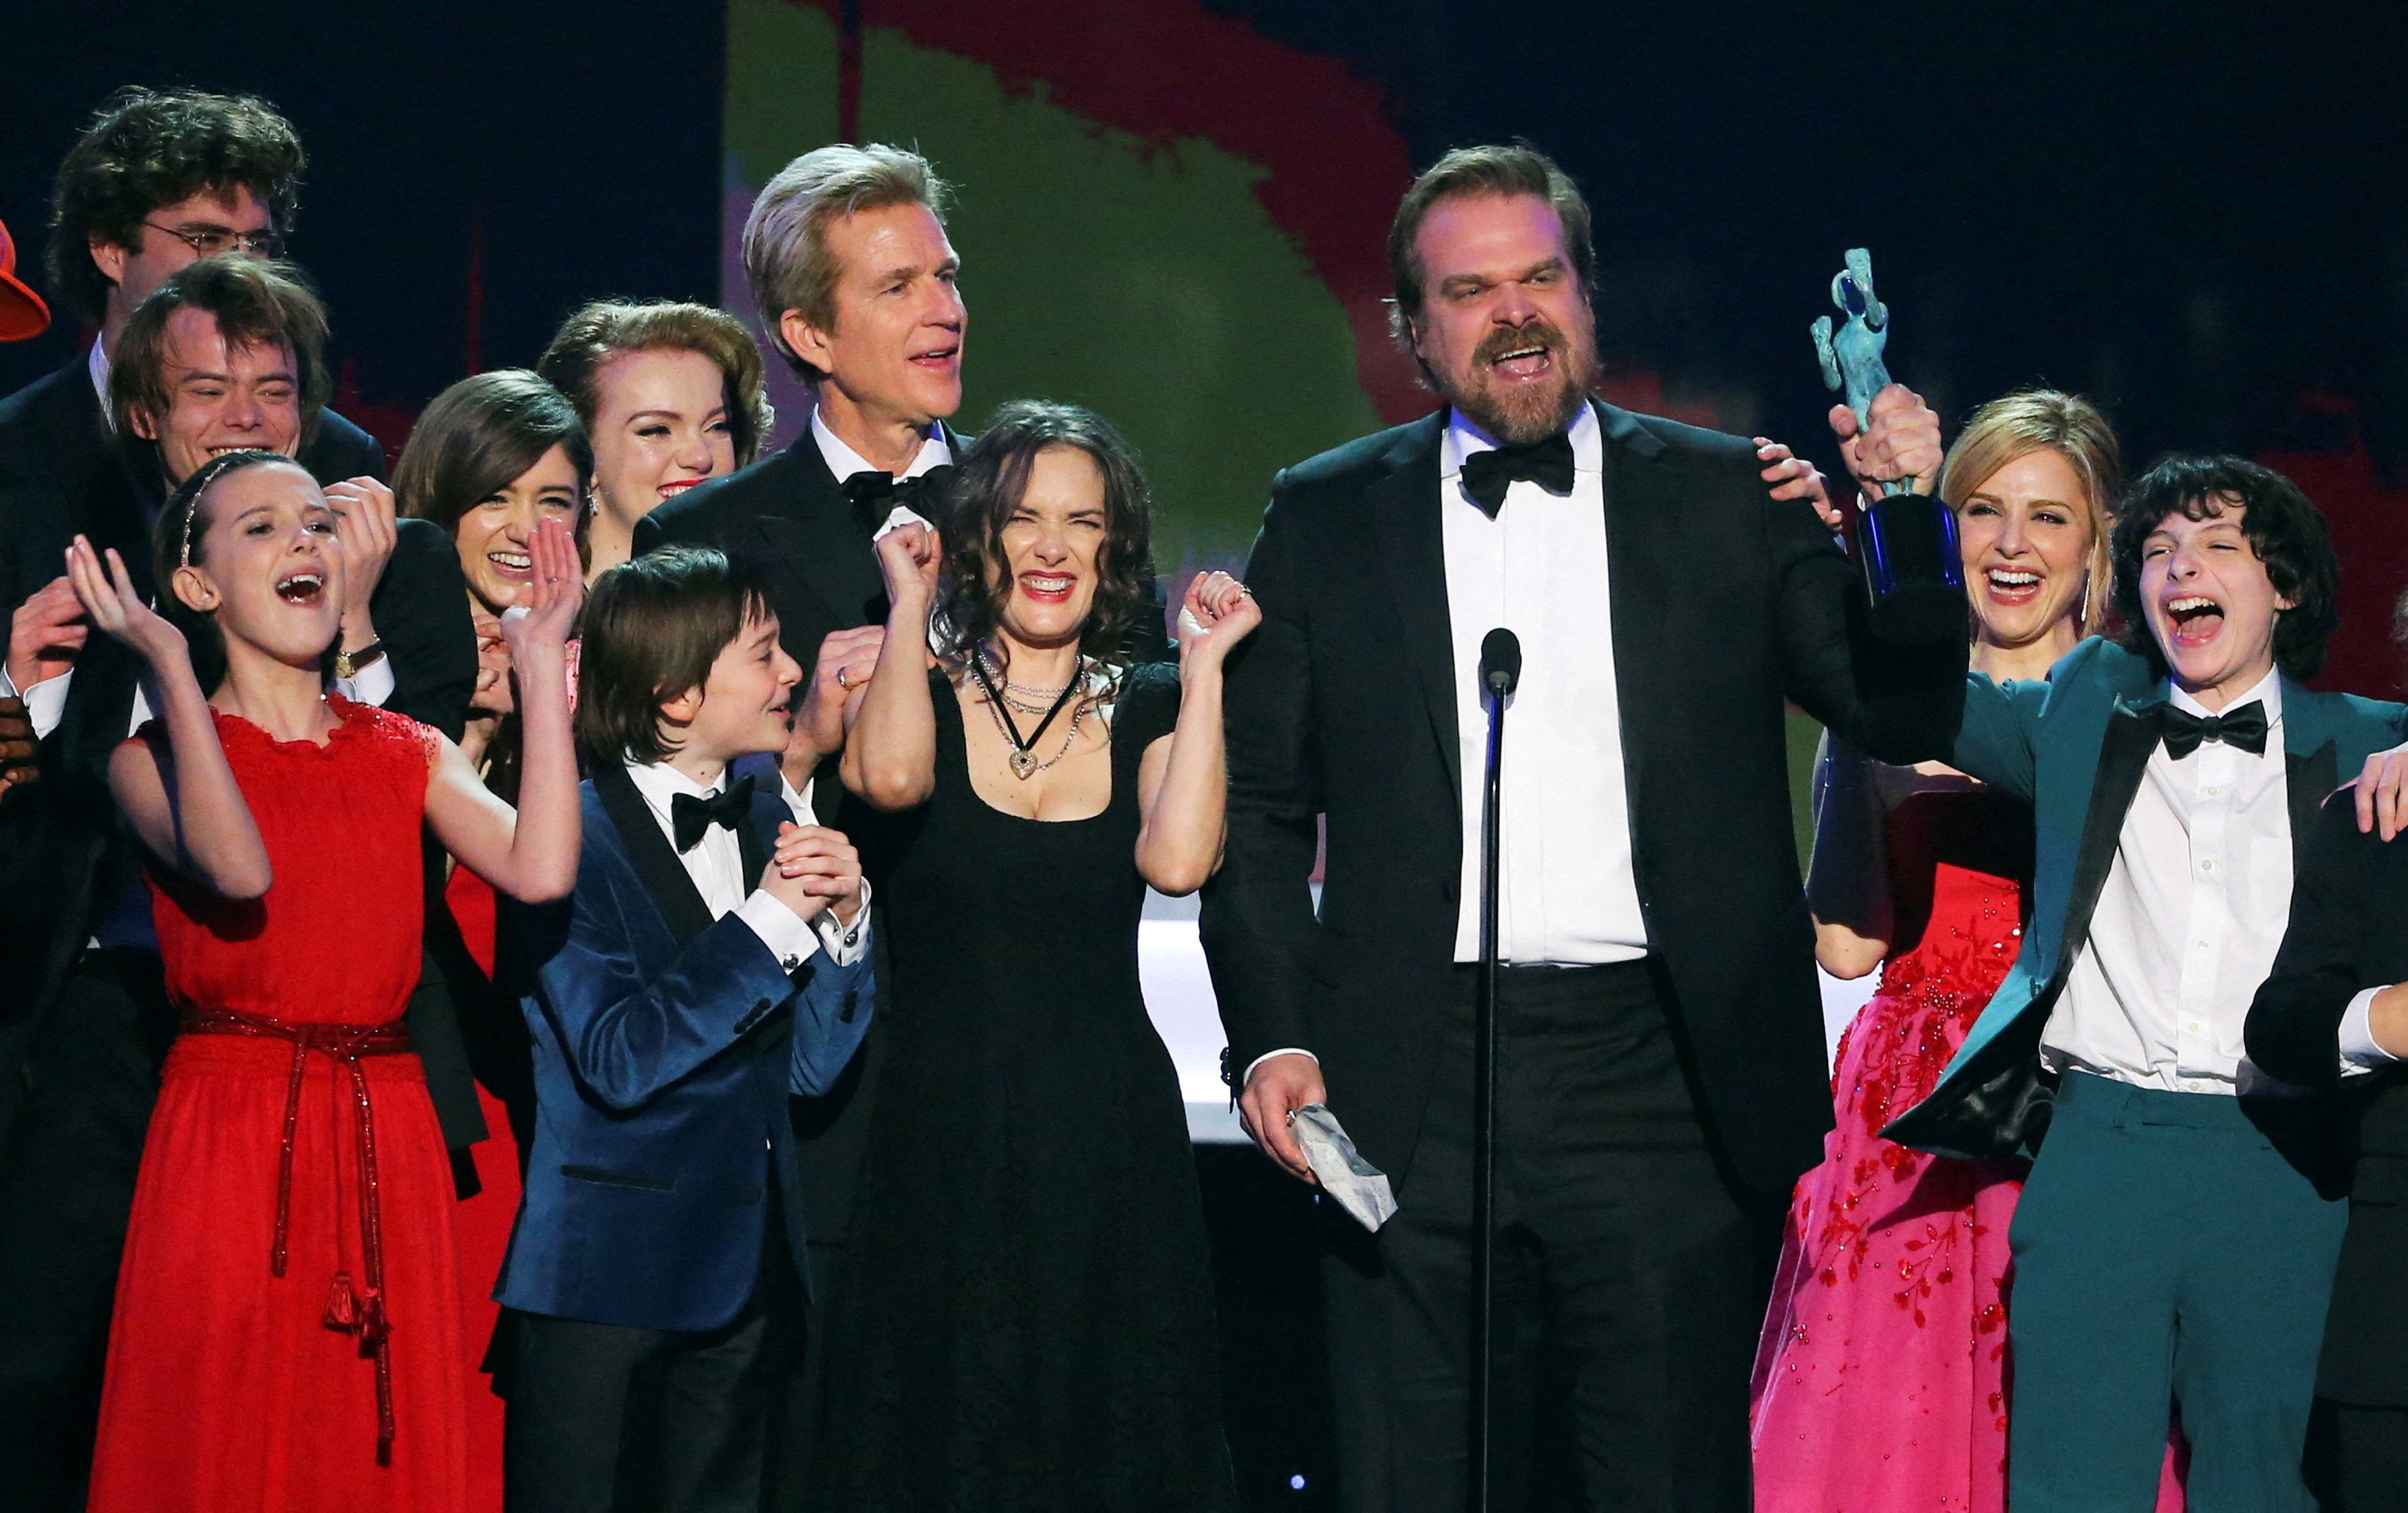 The cast of Stranger Things accepts their award during the 23rd Screen Actors Guild Awards in Los Angeles